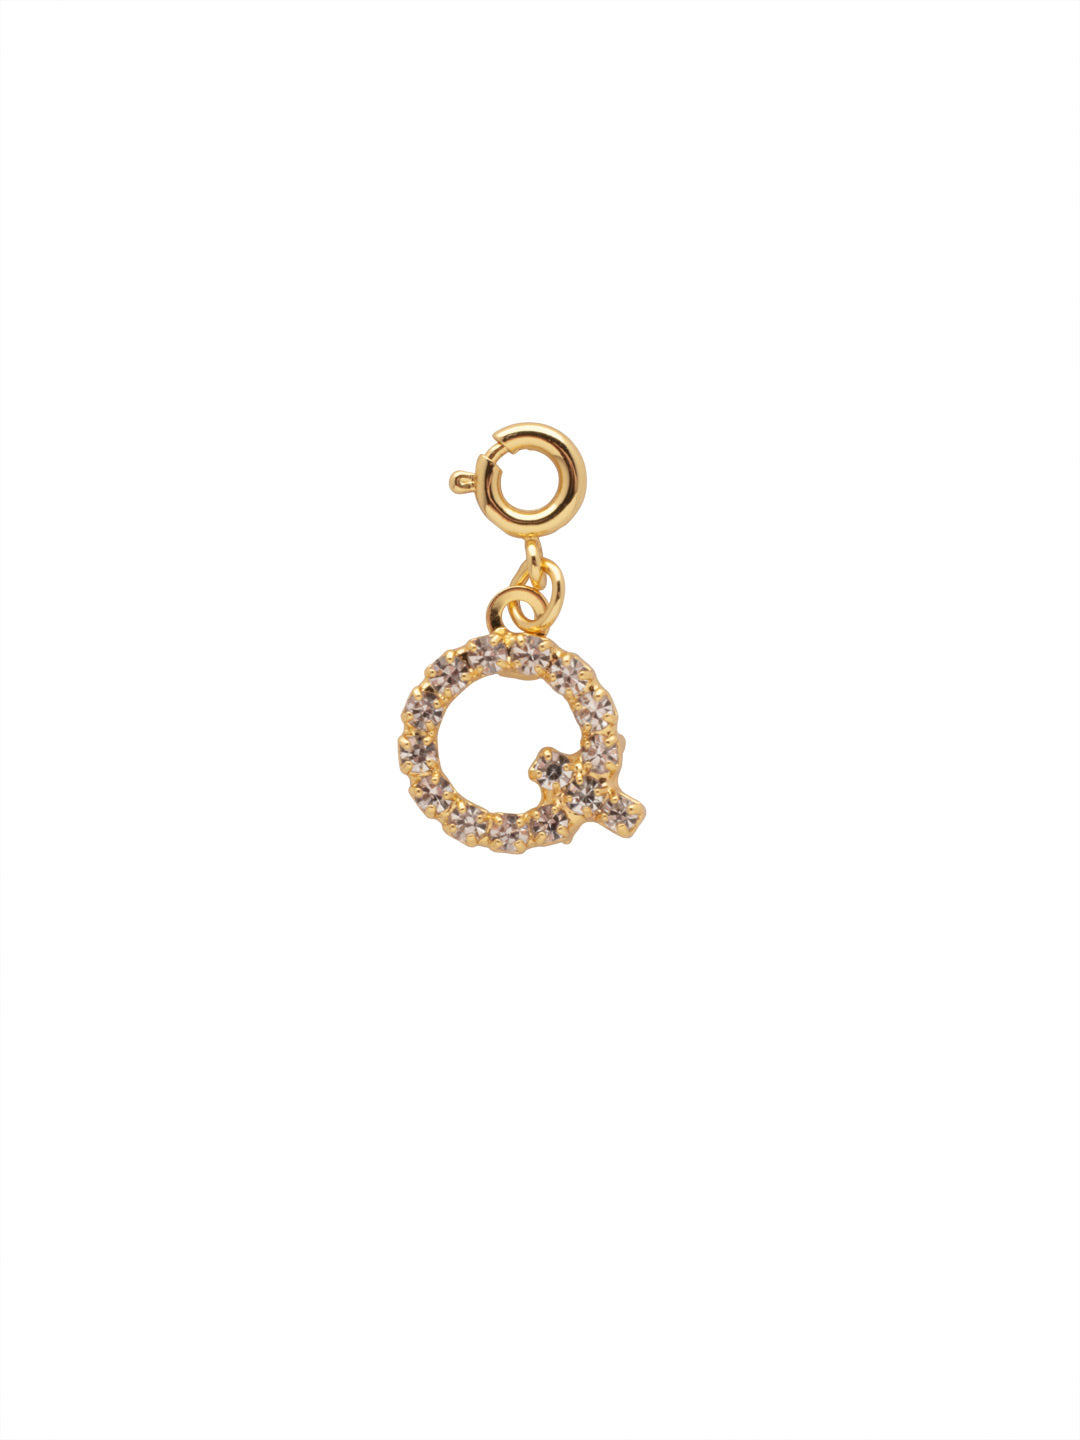 "Q" Initial Charm - CFB17BGCRY - <p>The Initial Charm features a metal letter embellished with small round crystals and a small spring ring clasp. From Sorrelli's Crystal collection in our Bright Gold-tone finish.</p>